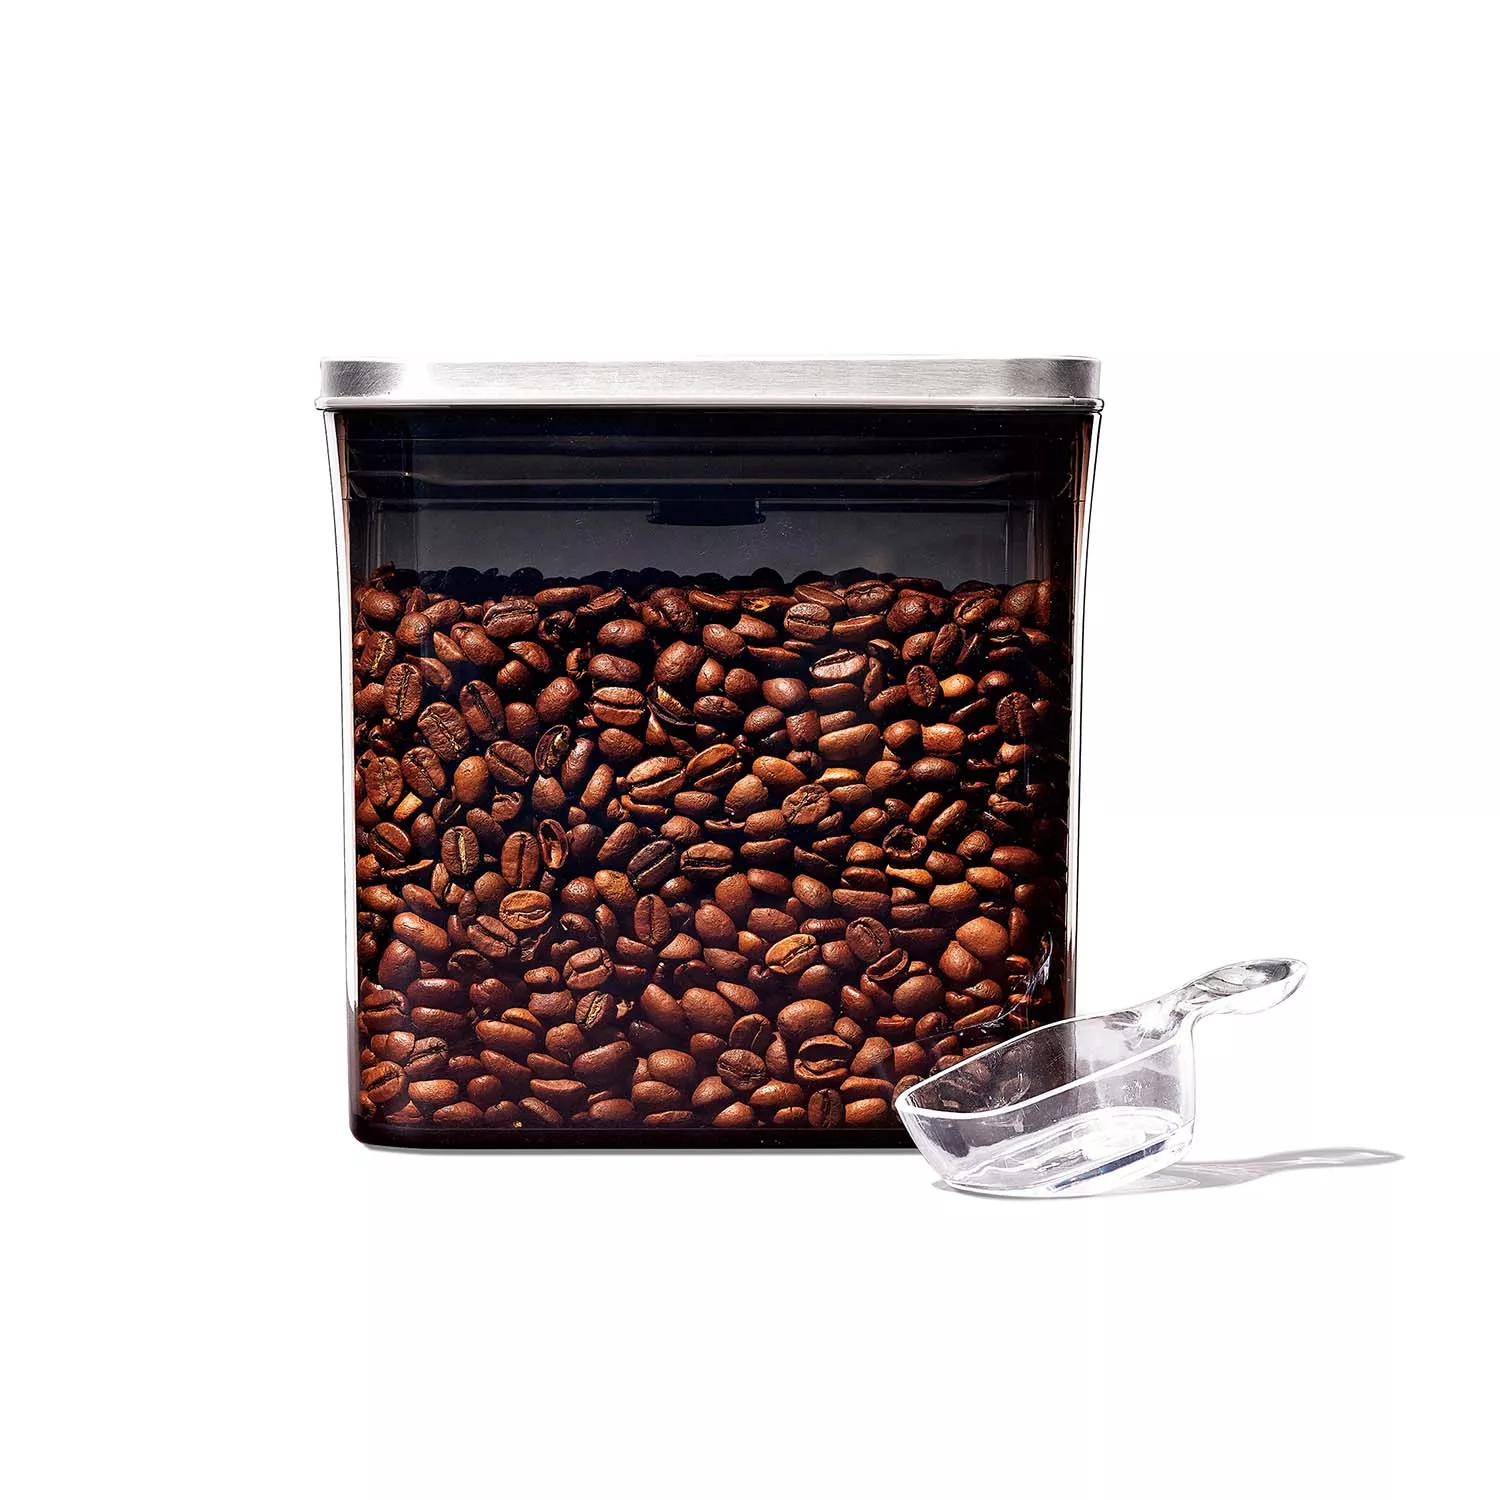 OXO 3119200 Steel Pop Coffee Container with Scoop, 1.7 Quart